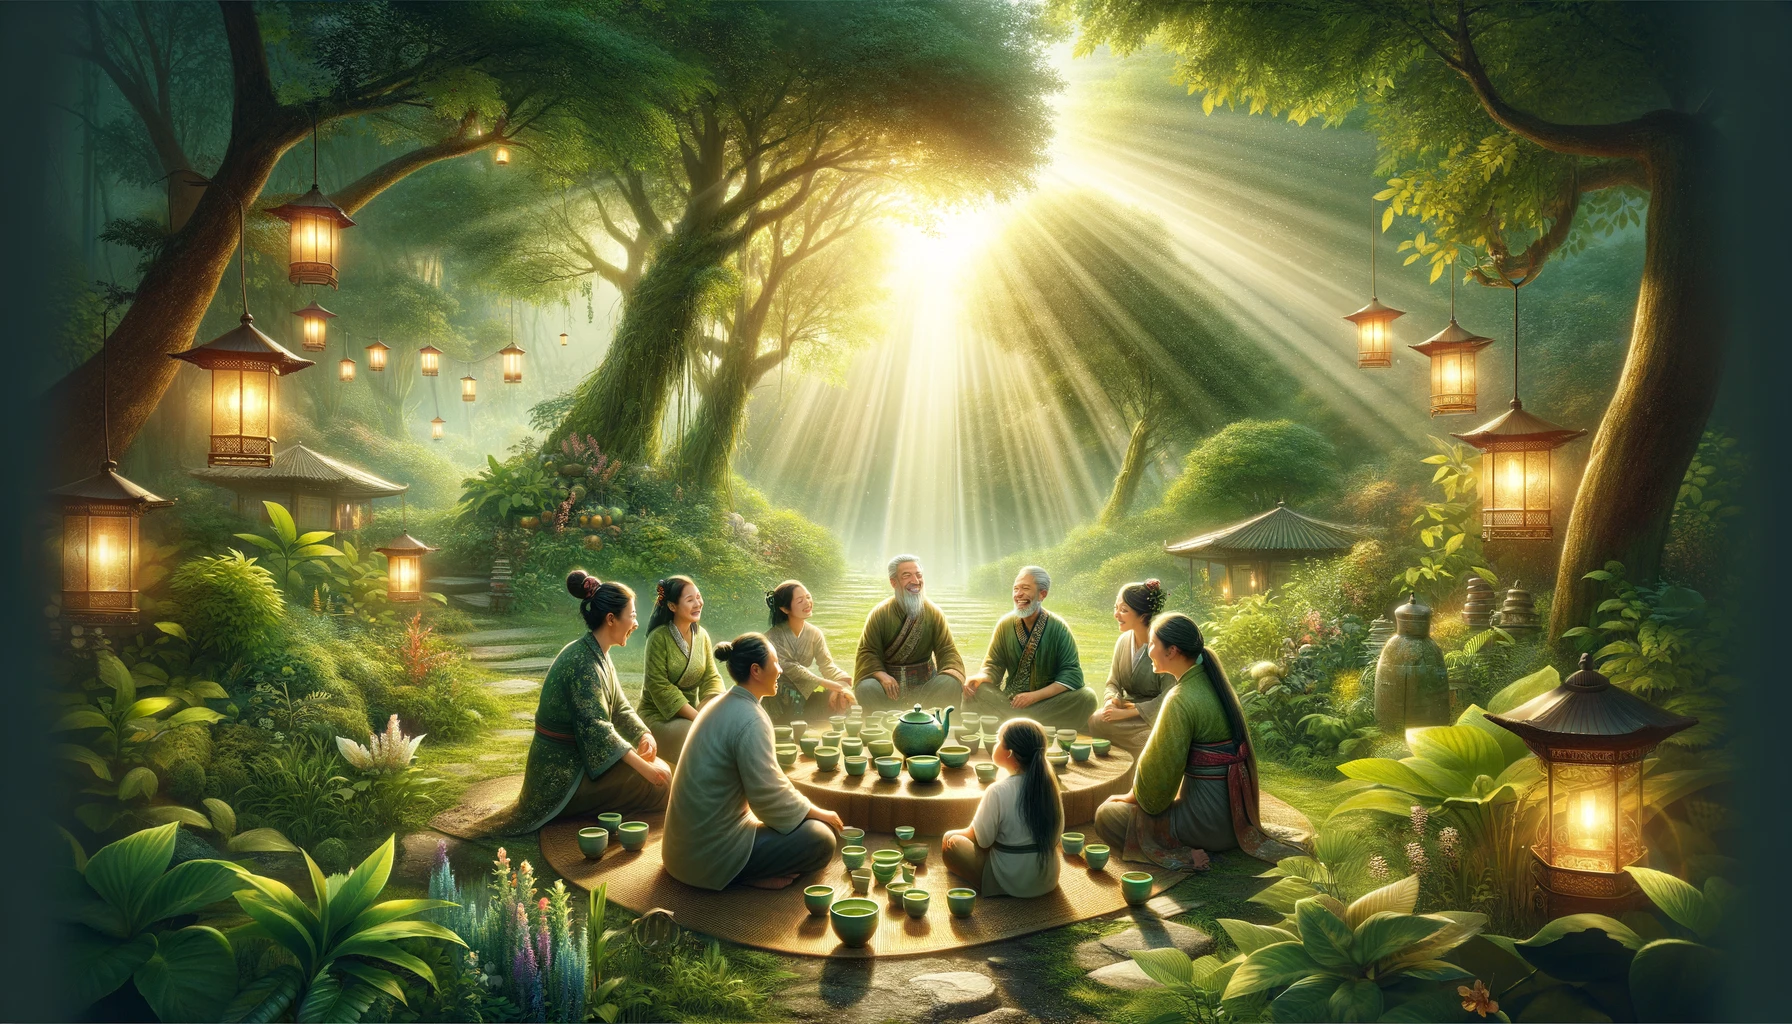 An image capturing the essence of contentment and fulfillment A picturesque scene of a harmonious family gathering surrounded by lush greenery radi